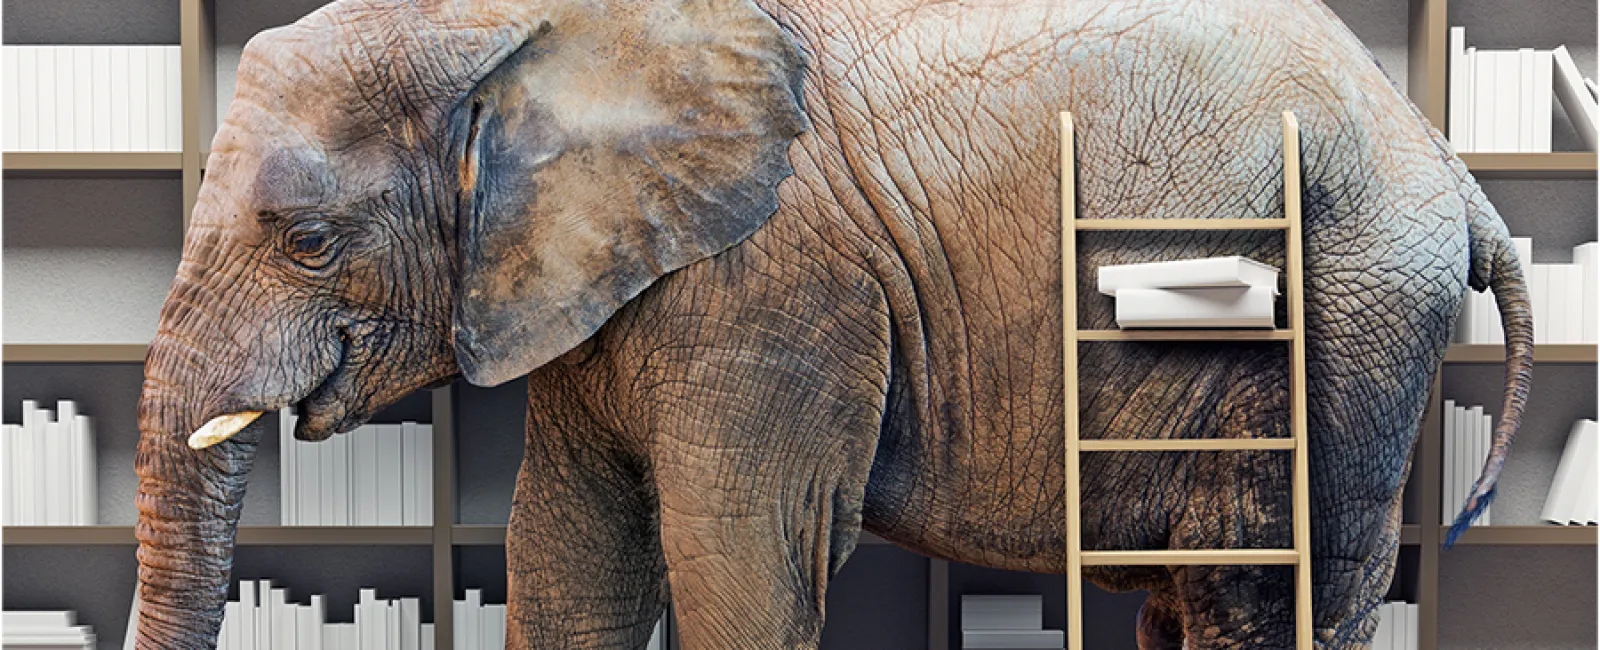 HIPAA compliance is the elephant in the room for the healthcare industry